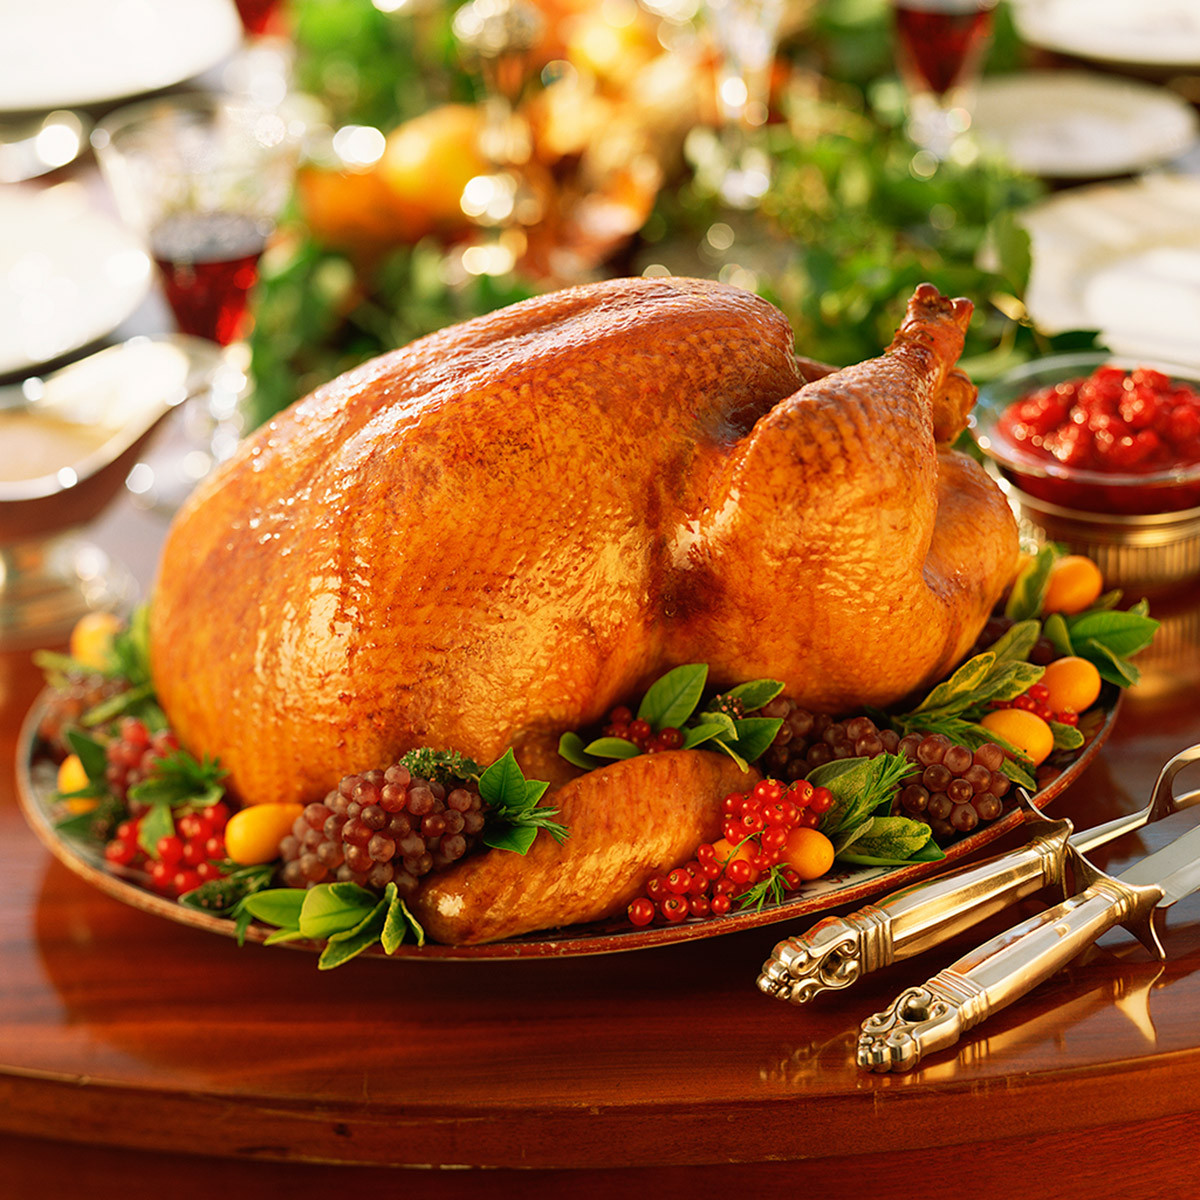 Best Turkey Brand To Buy For Thanksgiving
 Christmas taste tests which is the best tasting turkey